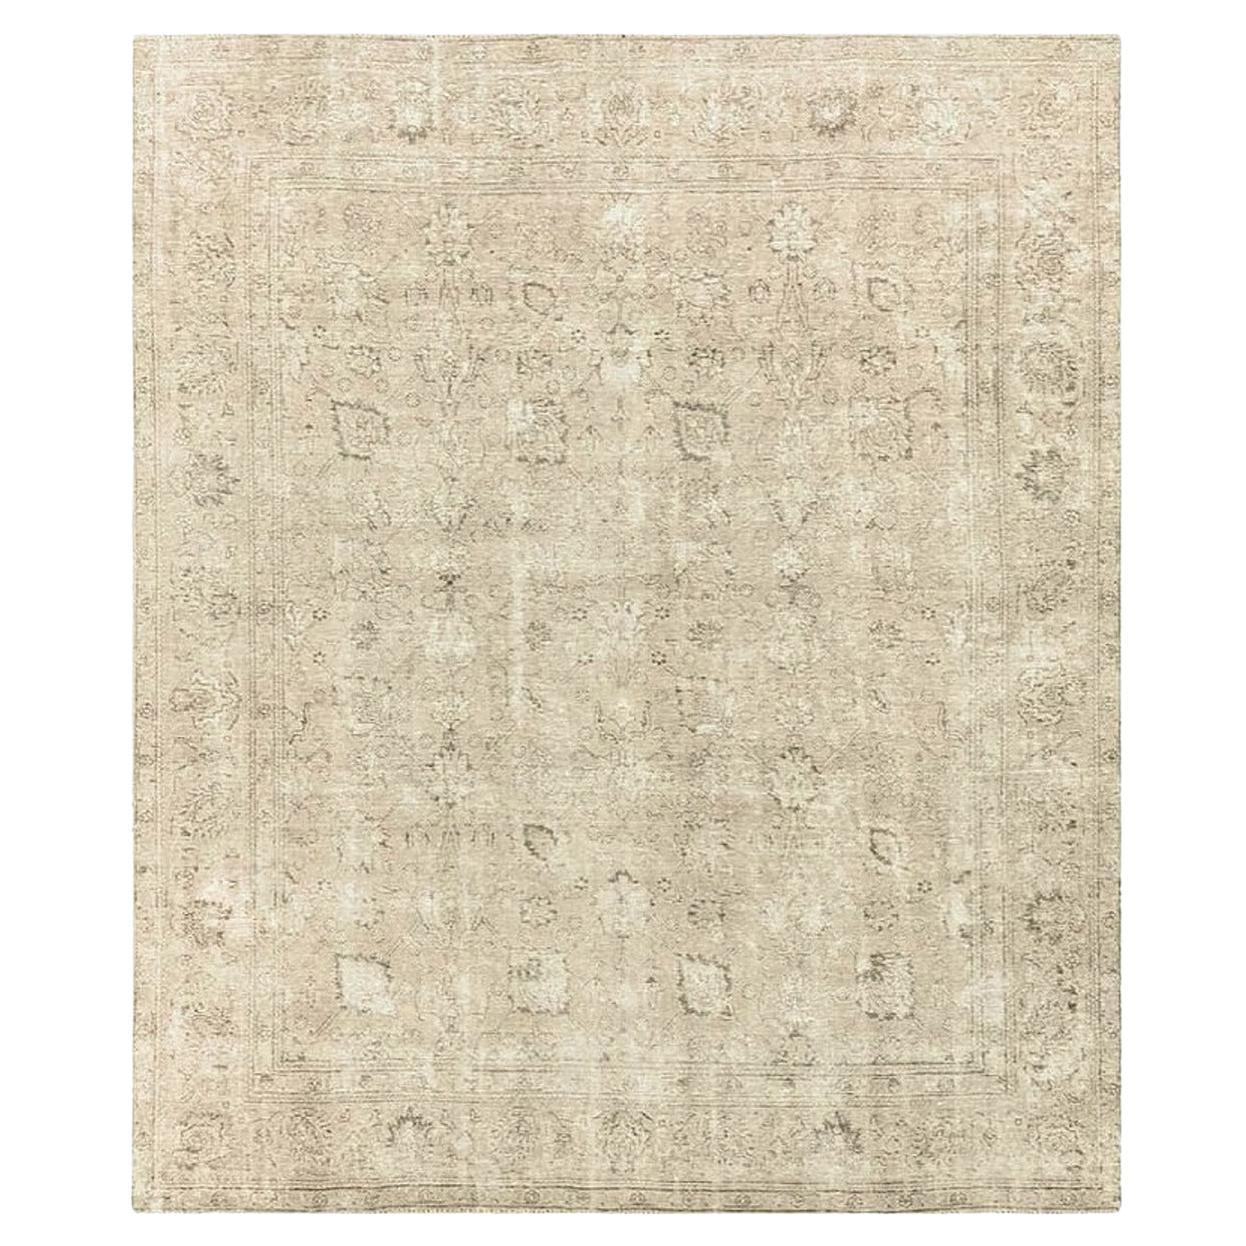 Vintage Muted Rug Classic Rug Gray Beige Brown Hand Knots Rugs Neutral Tabriz